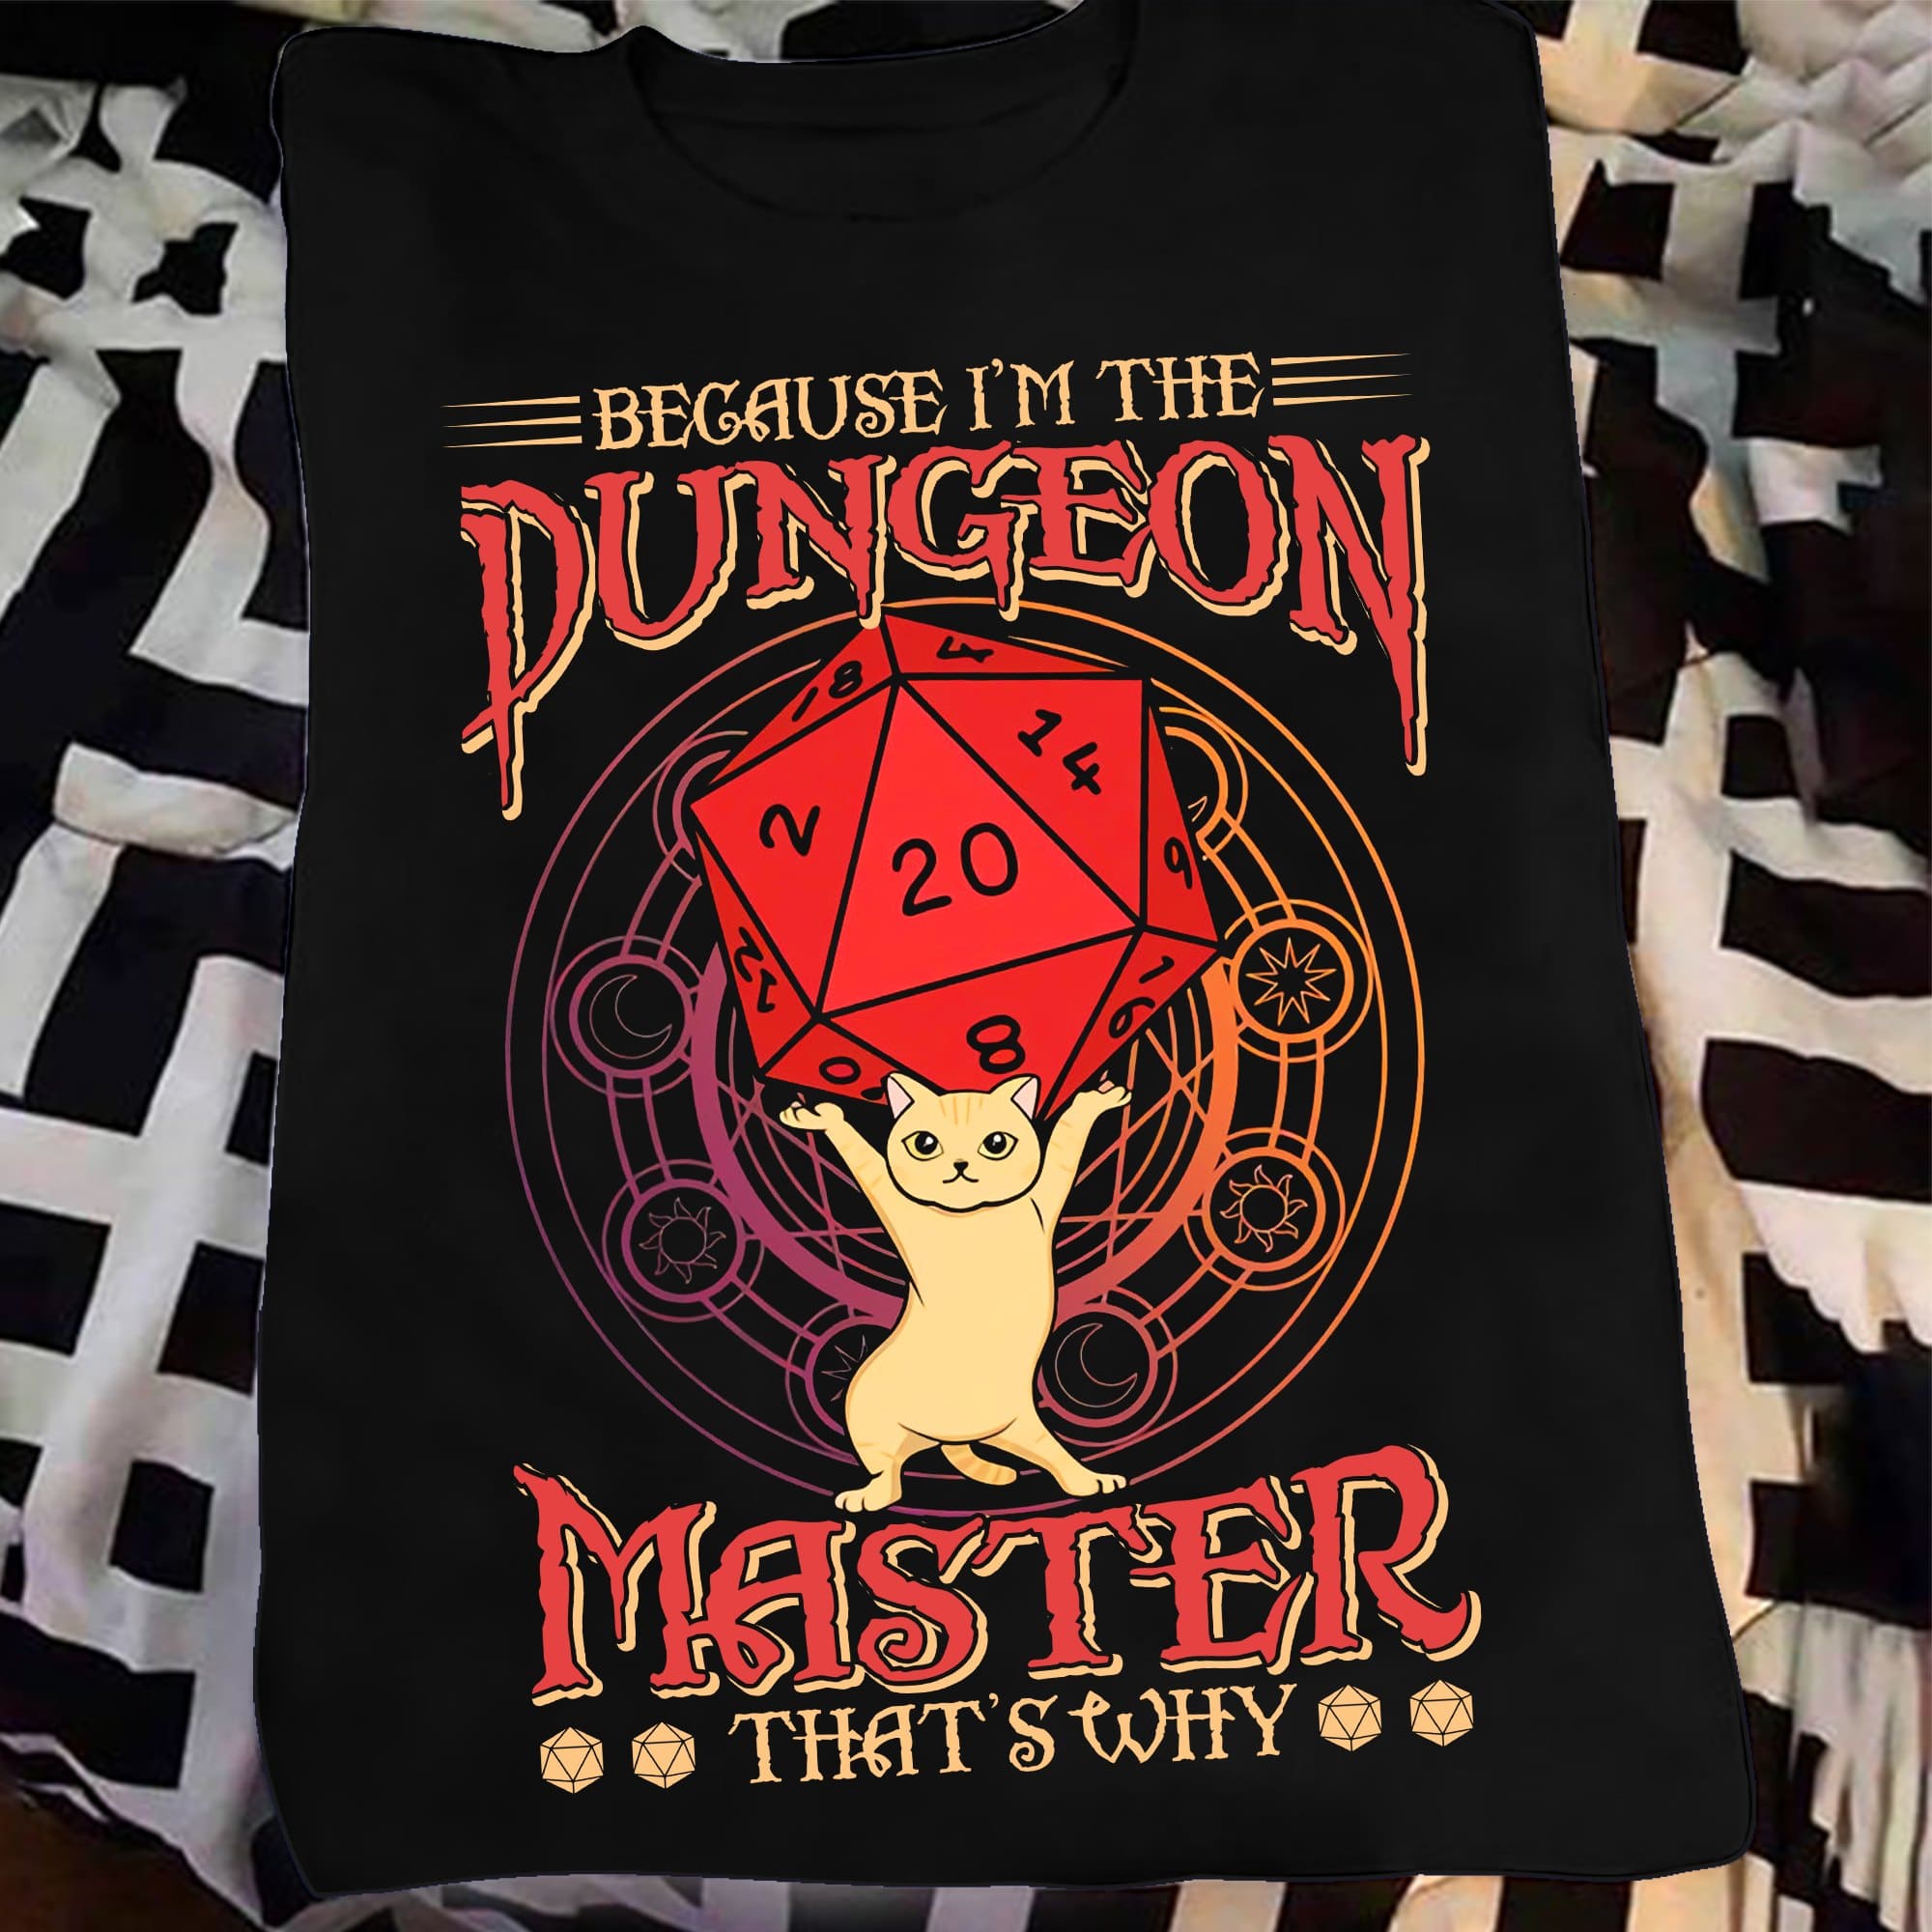 Because I'm the dungeon master - Cat and dices, Dungeons and Dragons